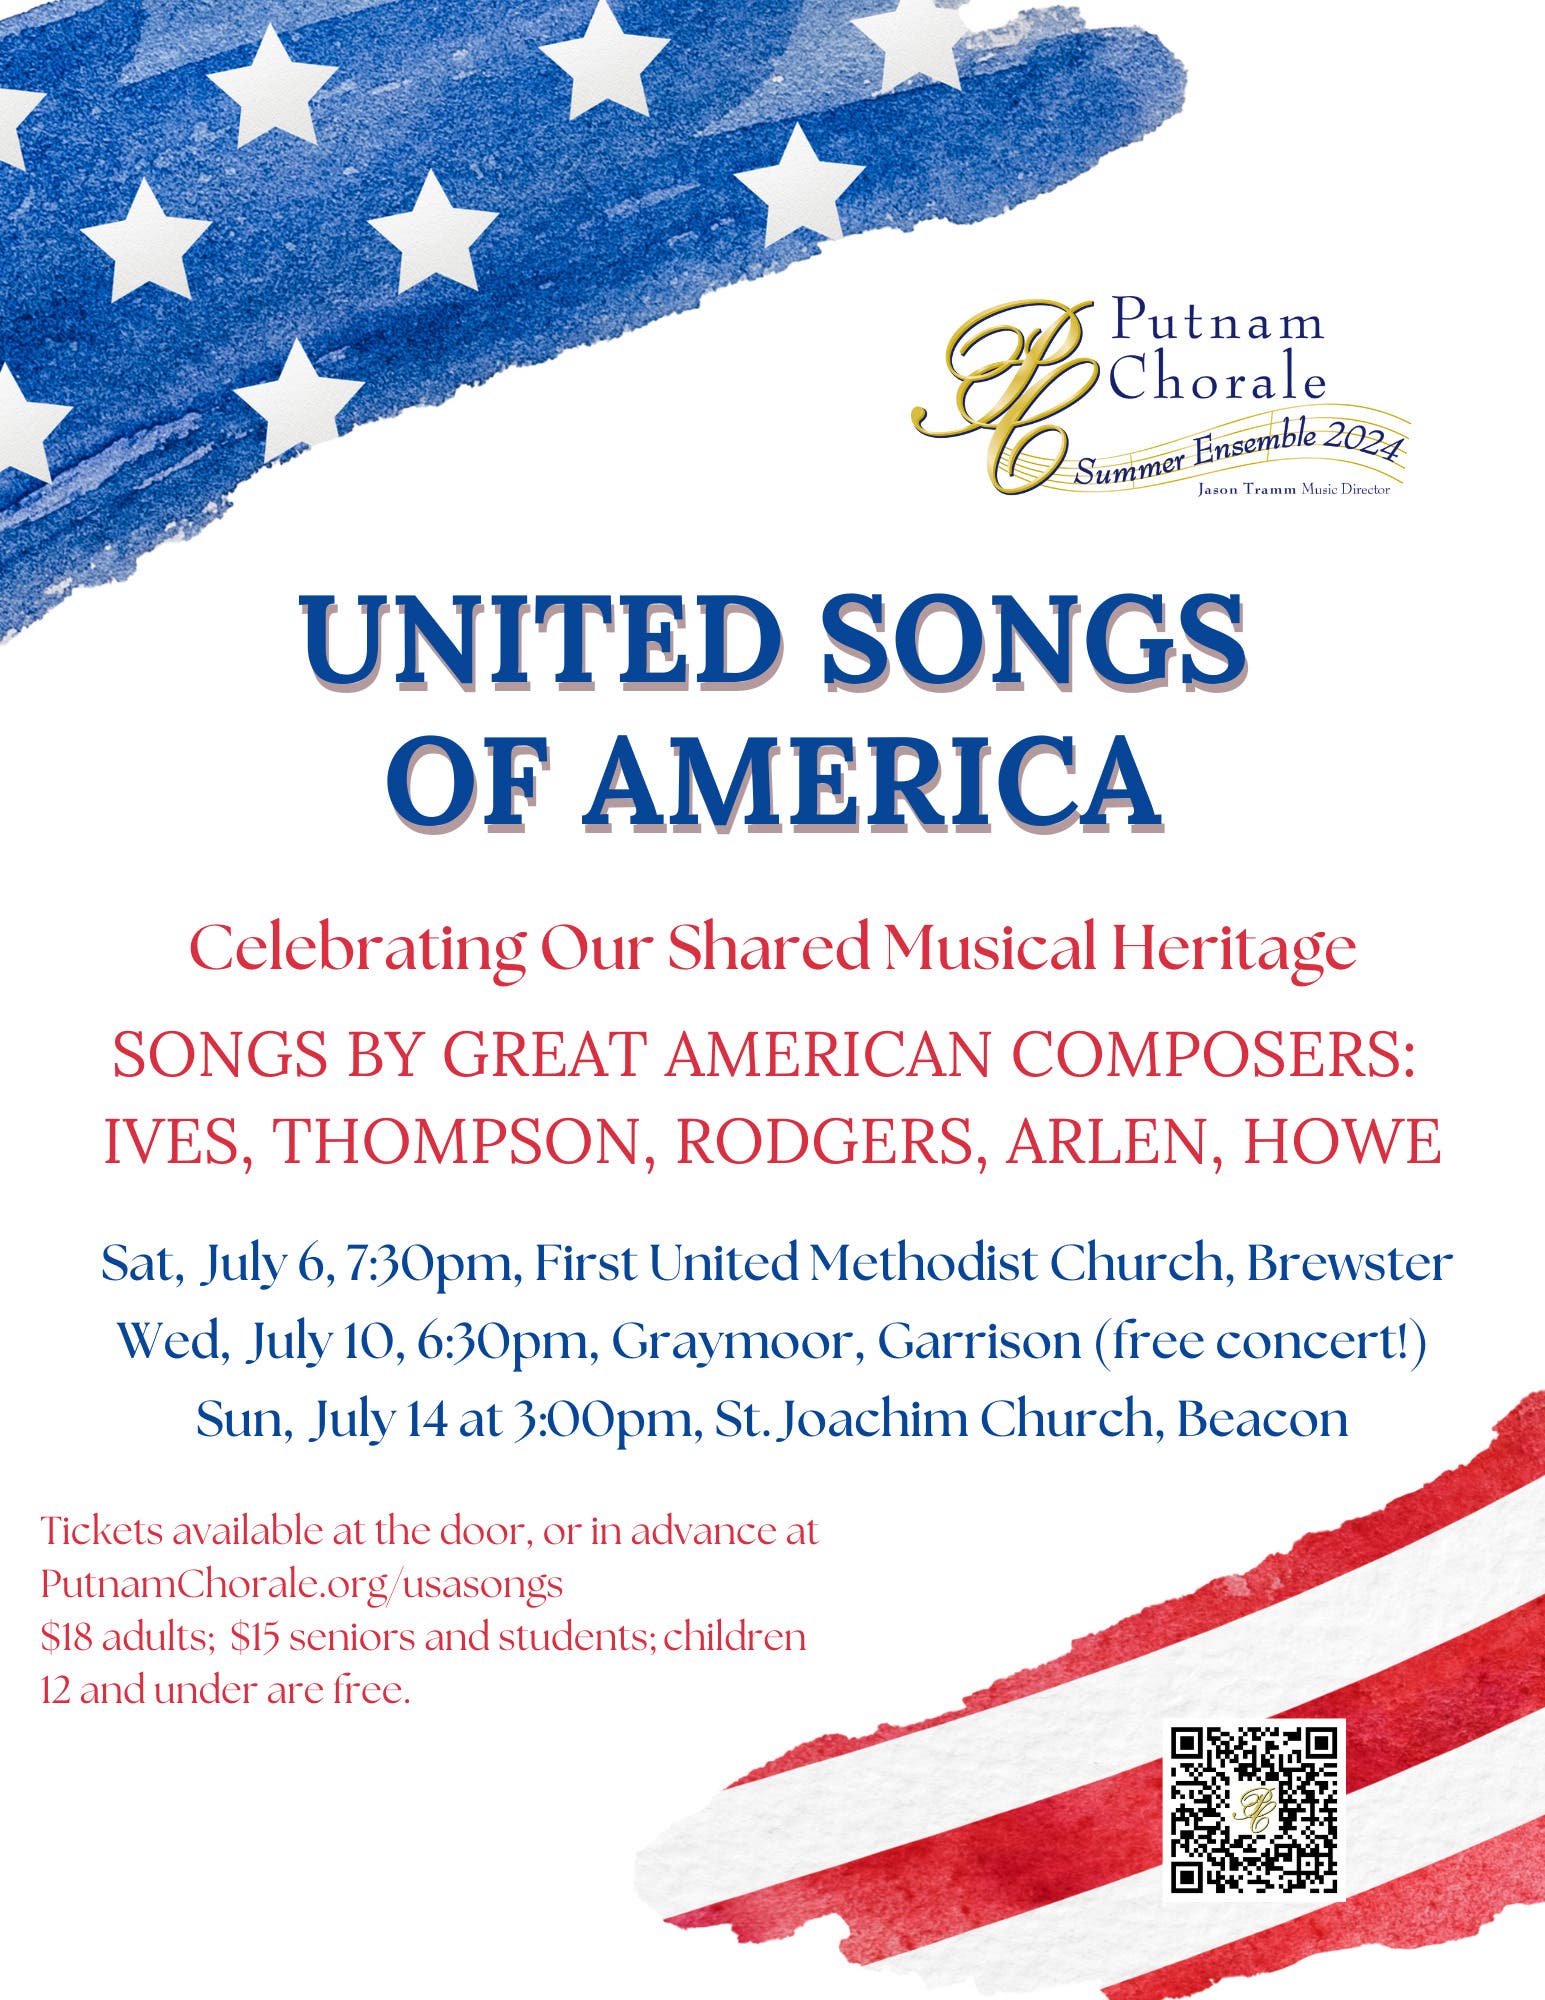 The Putnam Chorale Presents: United Songs of America